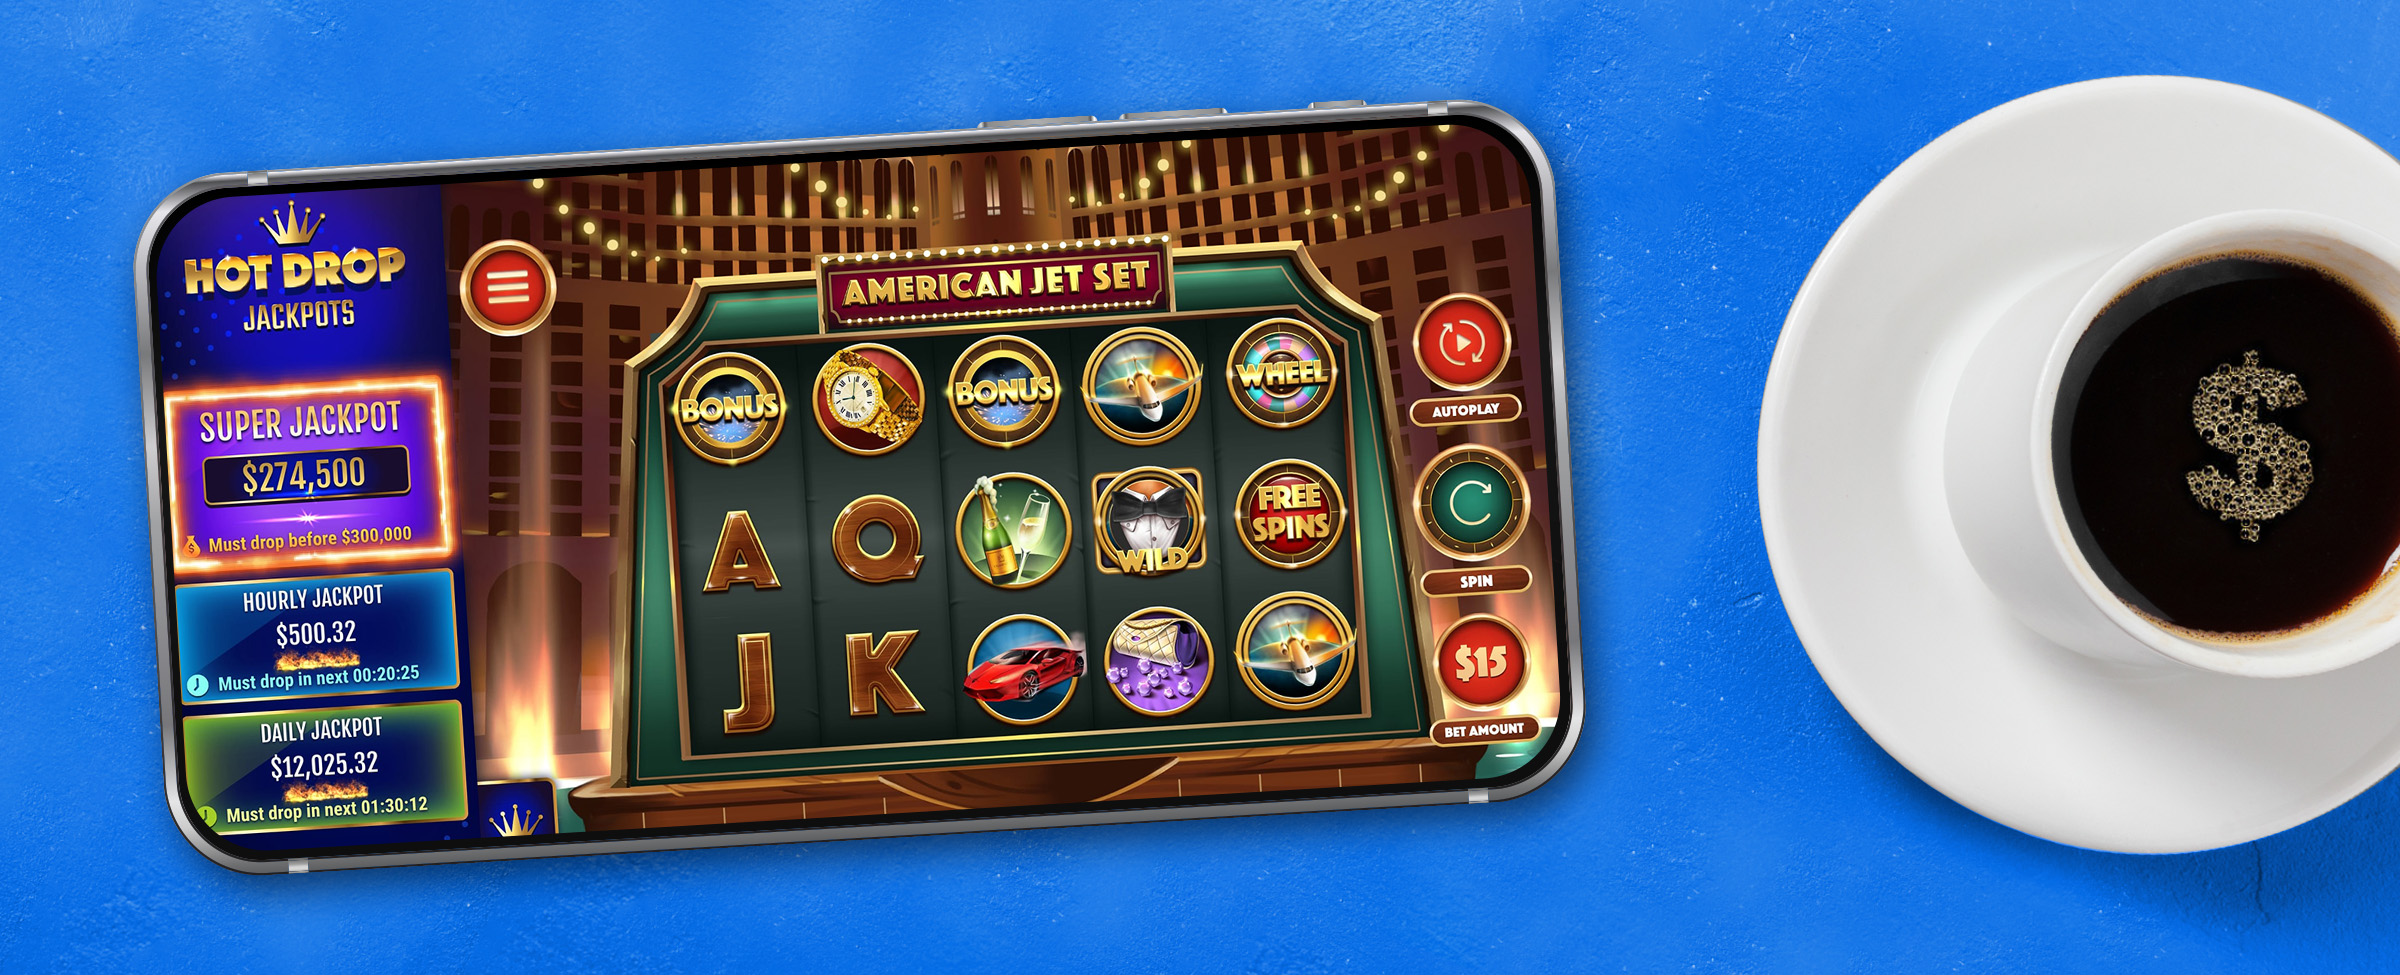 A mobile phone lays flat on a blue table surface, showing a screenshot of the Cafe Casino slot game American Jet Set Hot Drop Jackpots, while a coffee cup with black coffee and a gold-sprinkled dollar sign sits on a white saucer.